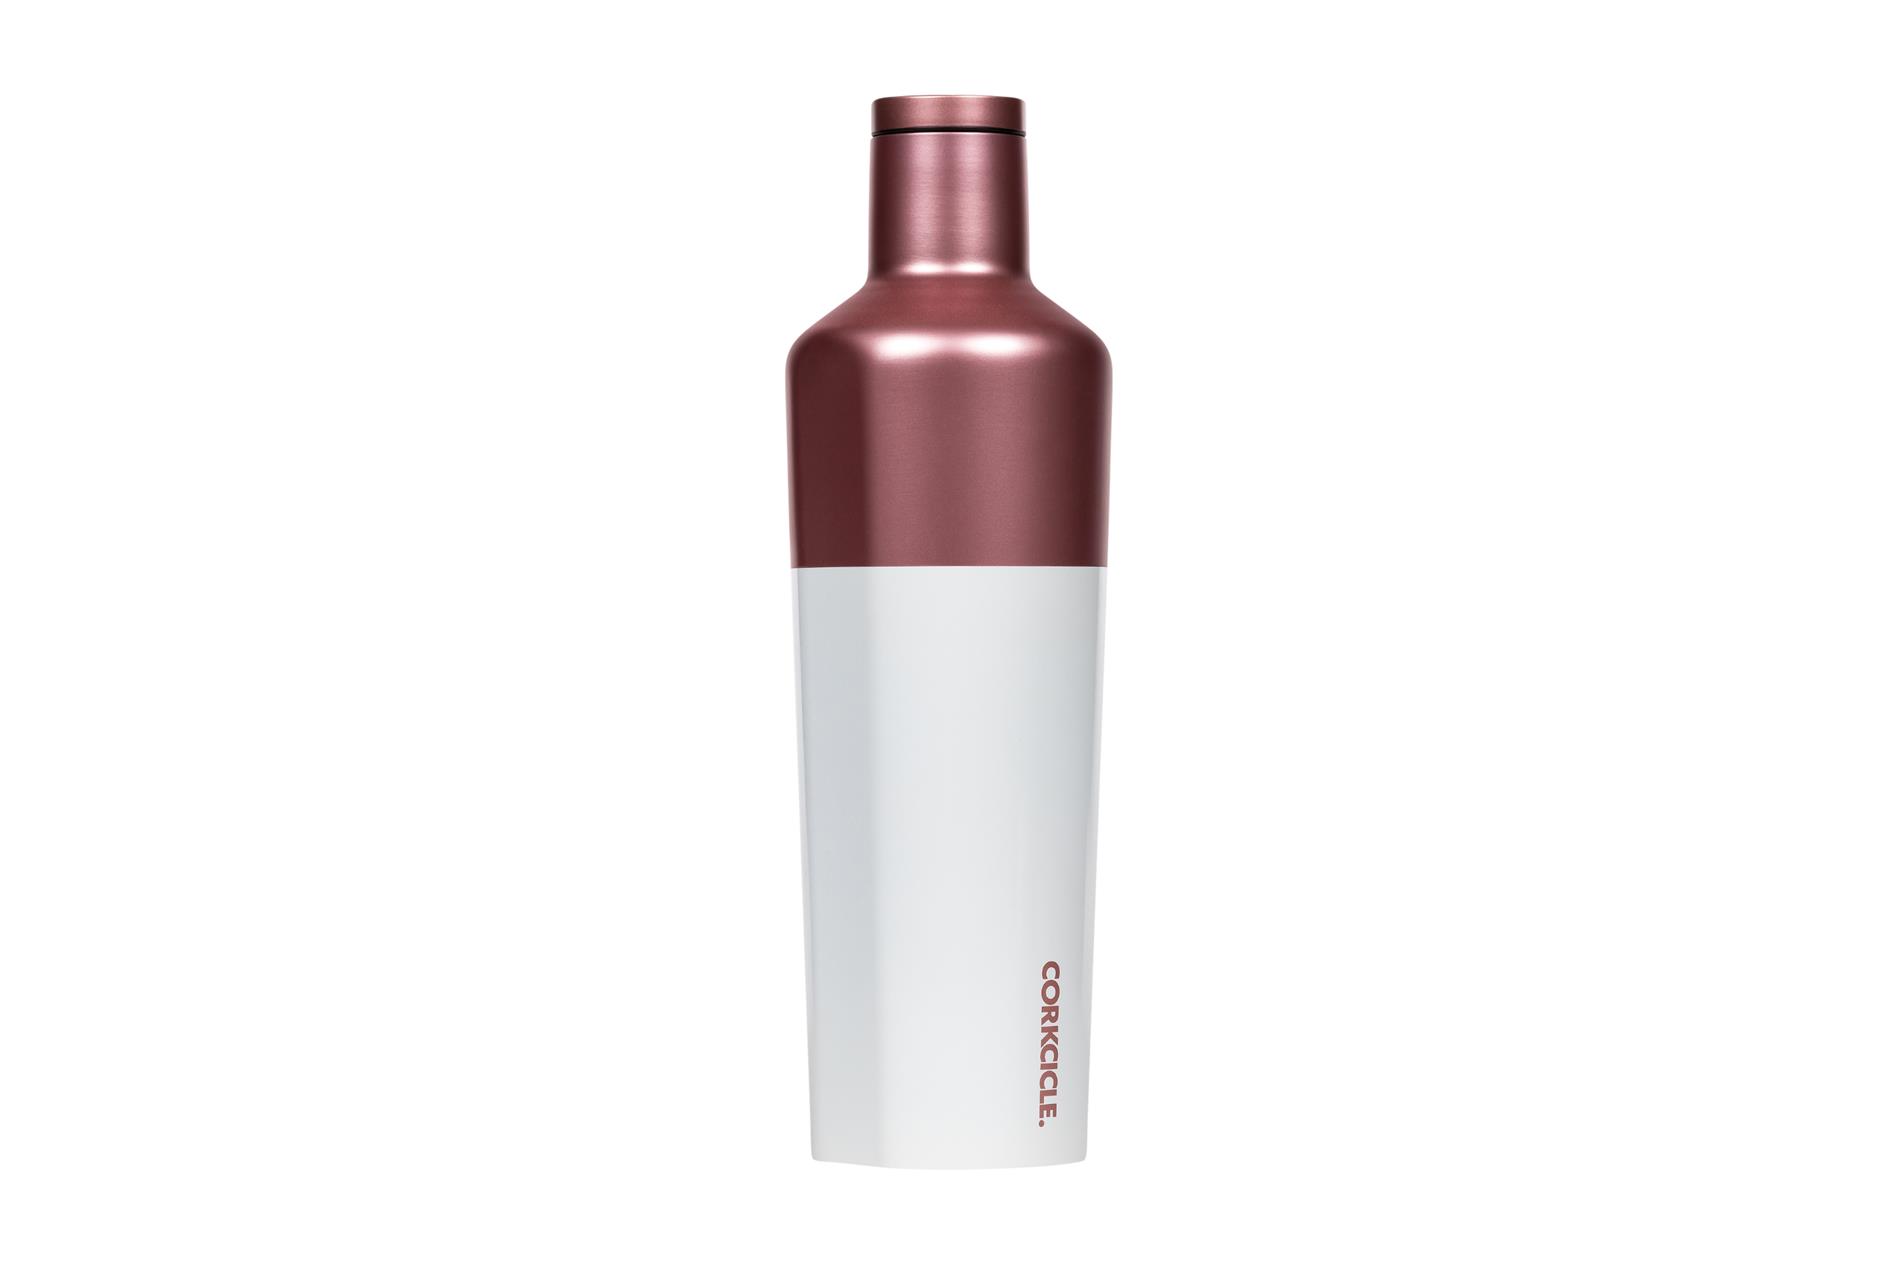 Corkcicle Trinkflasche / Thermo Isolierflasche Rosé 475 ml Color Block